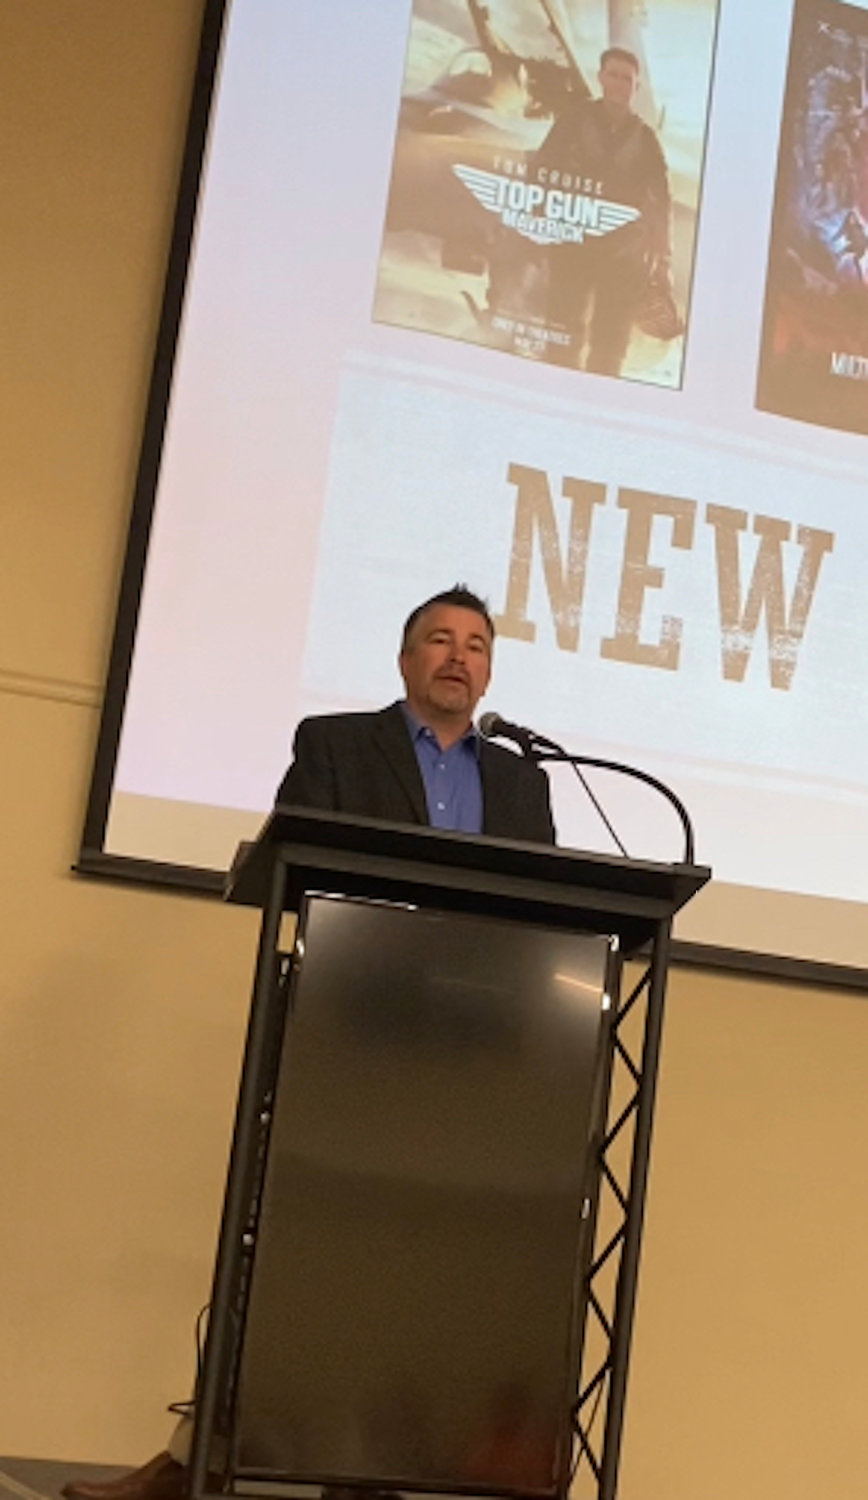 Perryville city administrator Brent Buerck provides an update on a variety of city-related topics at the Chamber of Commerce’s Coffee and Connections event Wednesday, June 8, at Robinson Event Center.